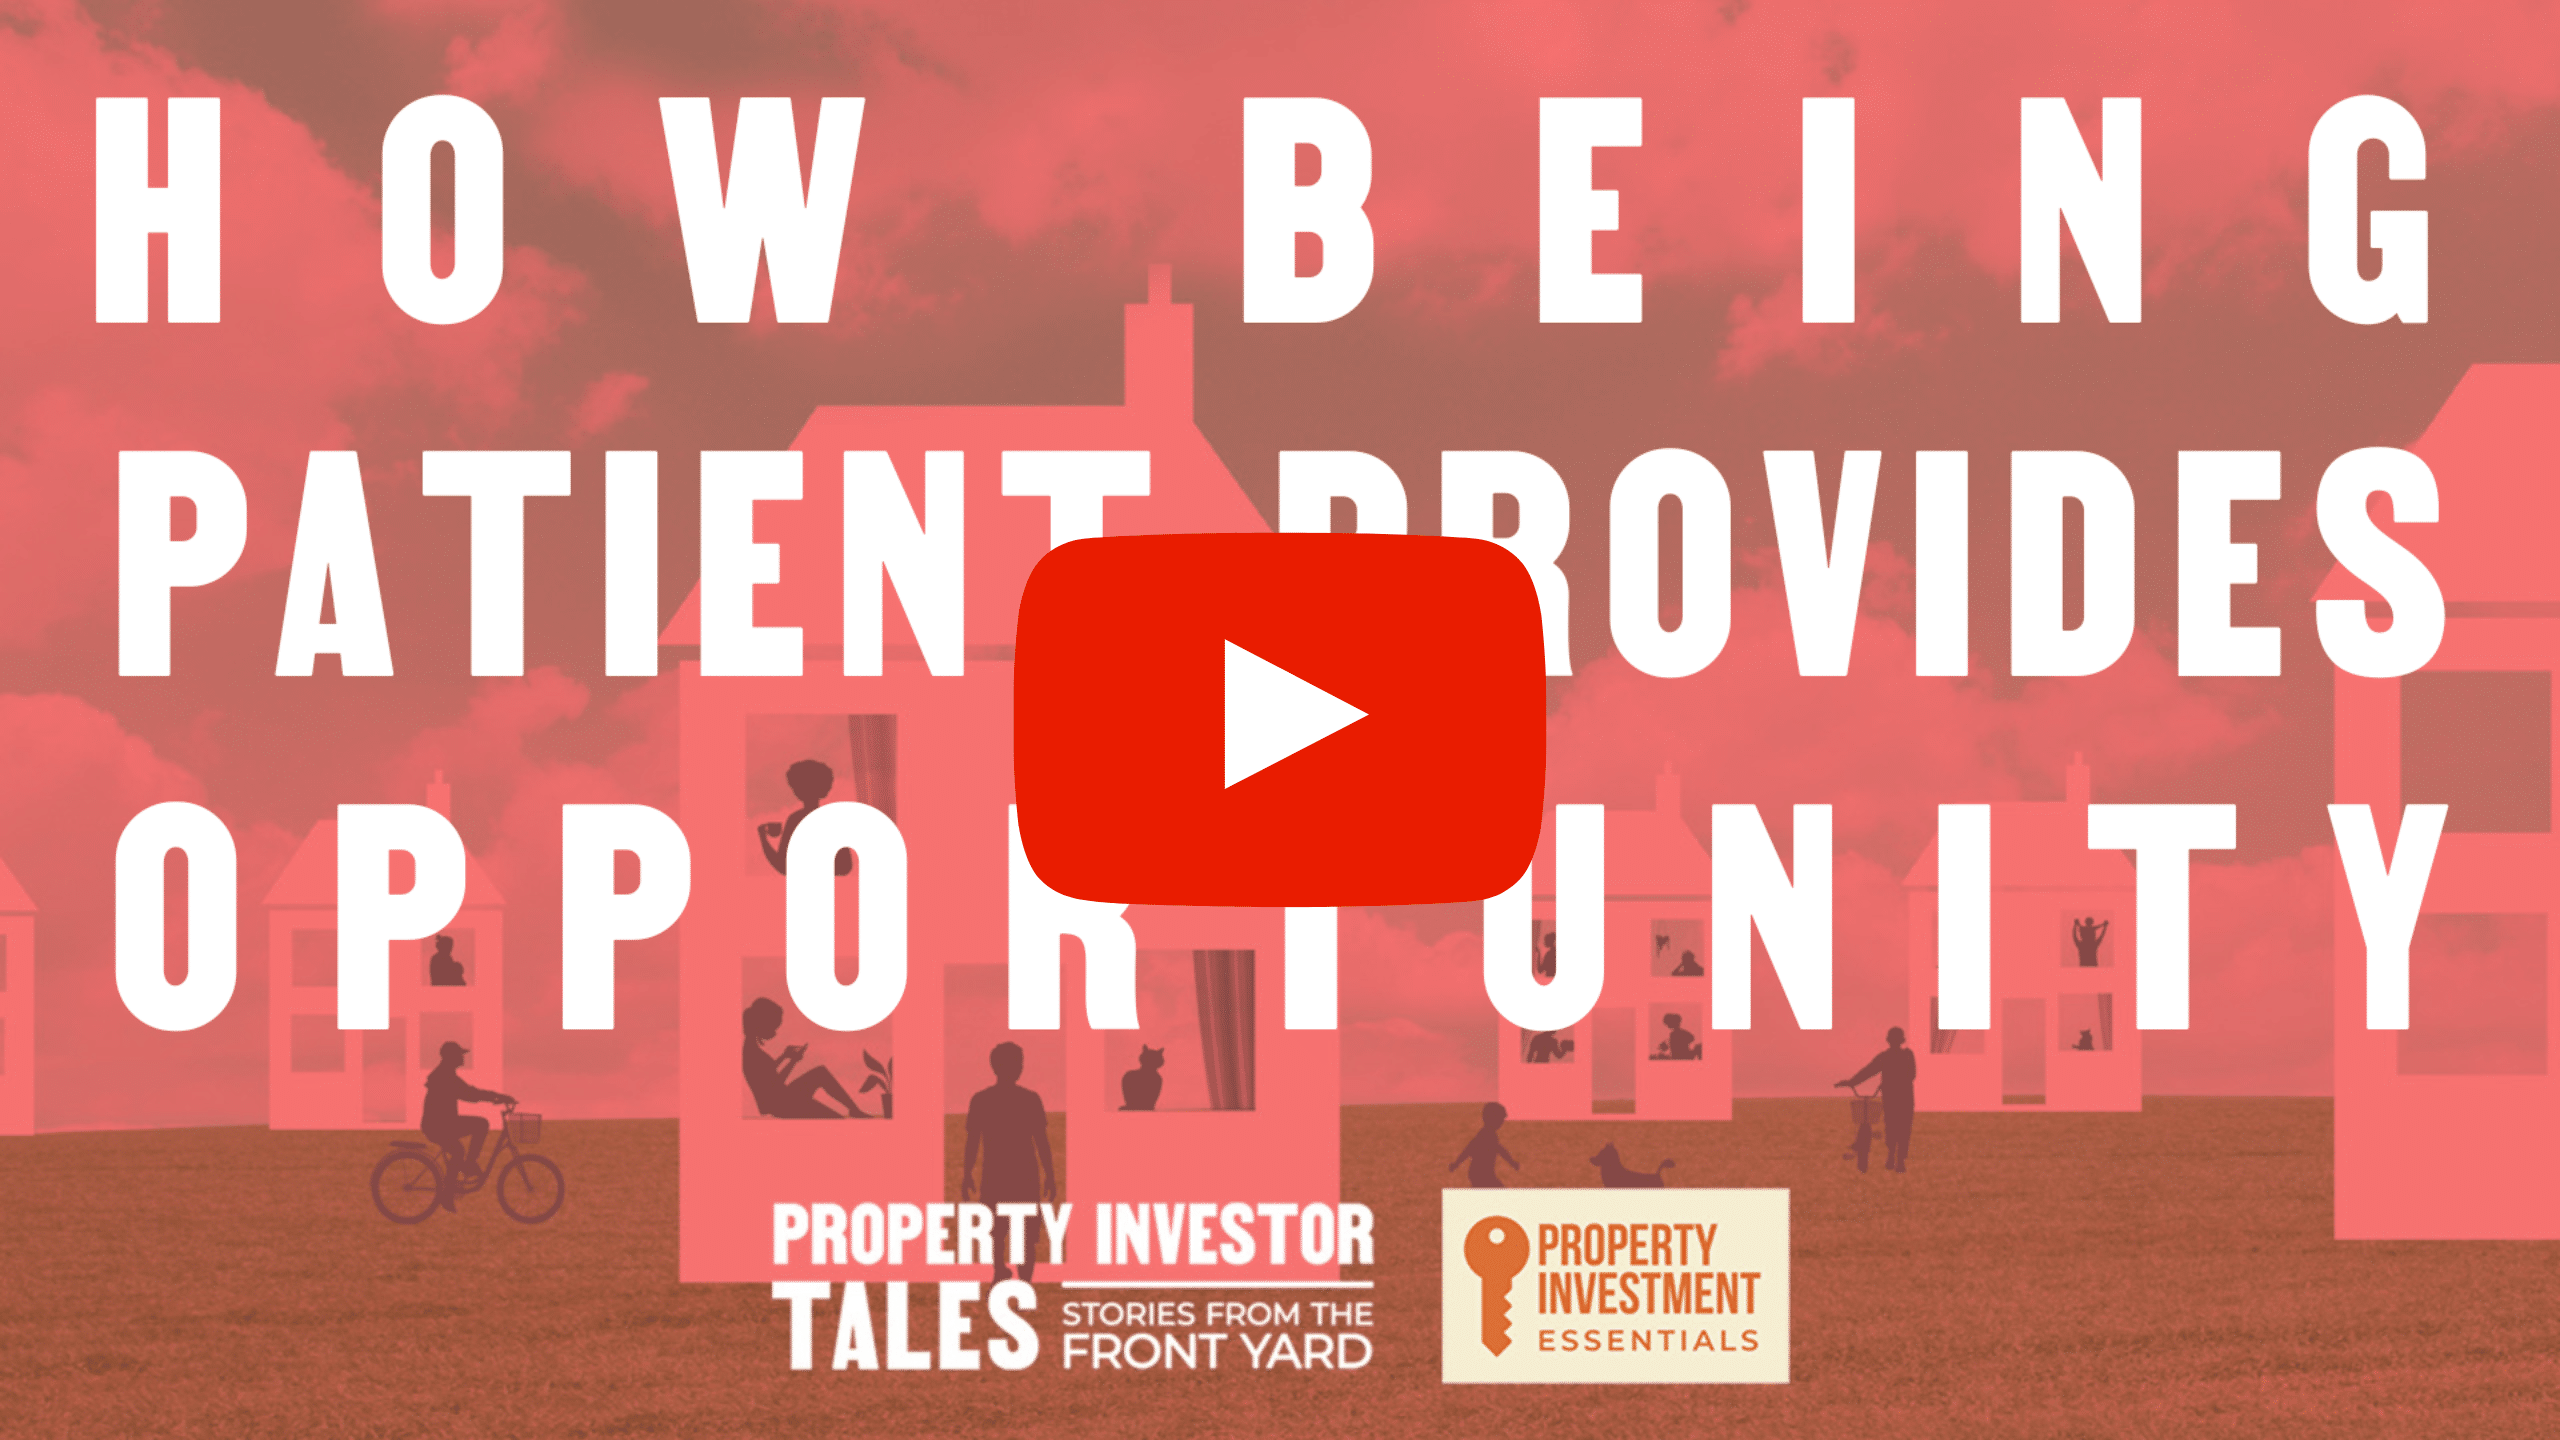 Property Investor Tales podcast thumbnail image 